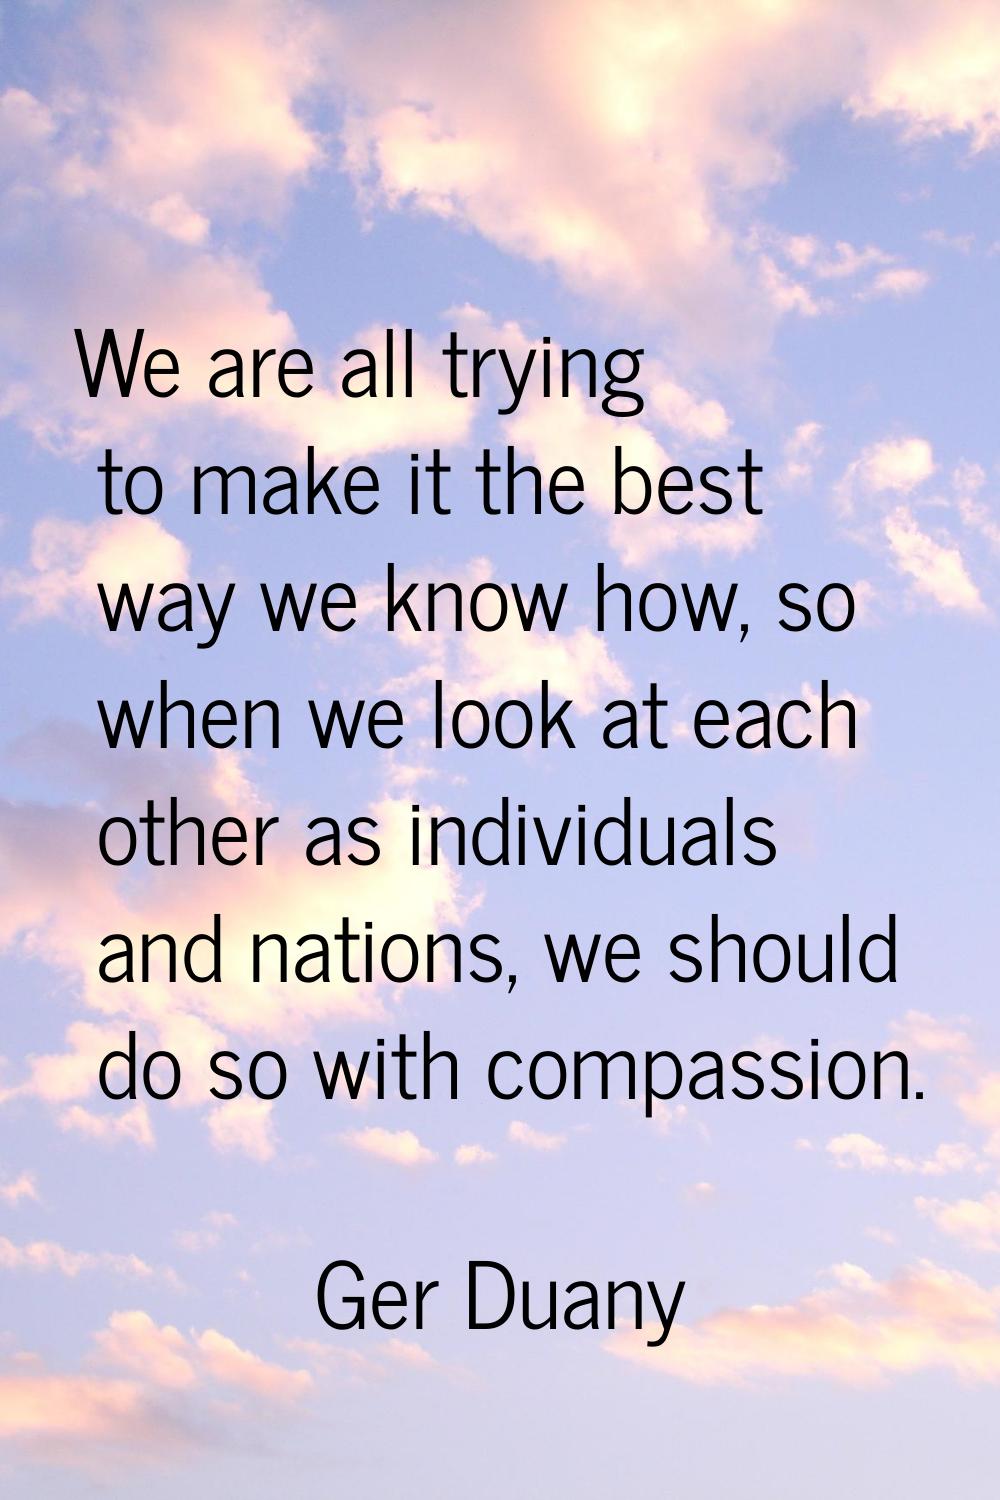 We are all trying to make it the best way we know how, so when we look at each other as individuals